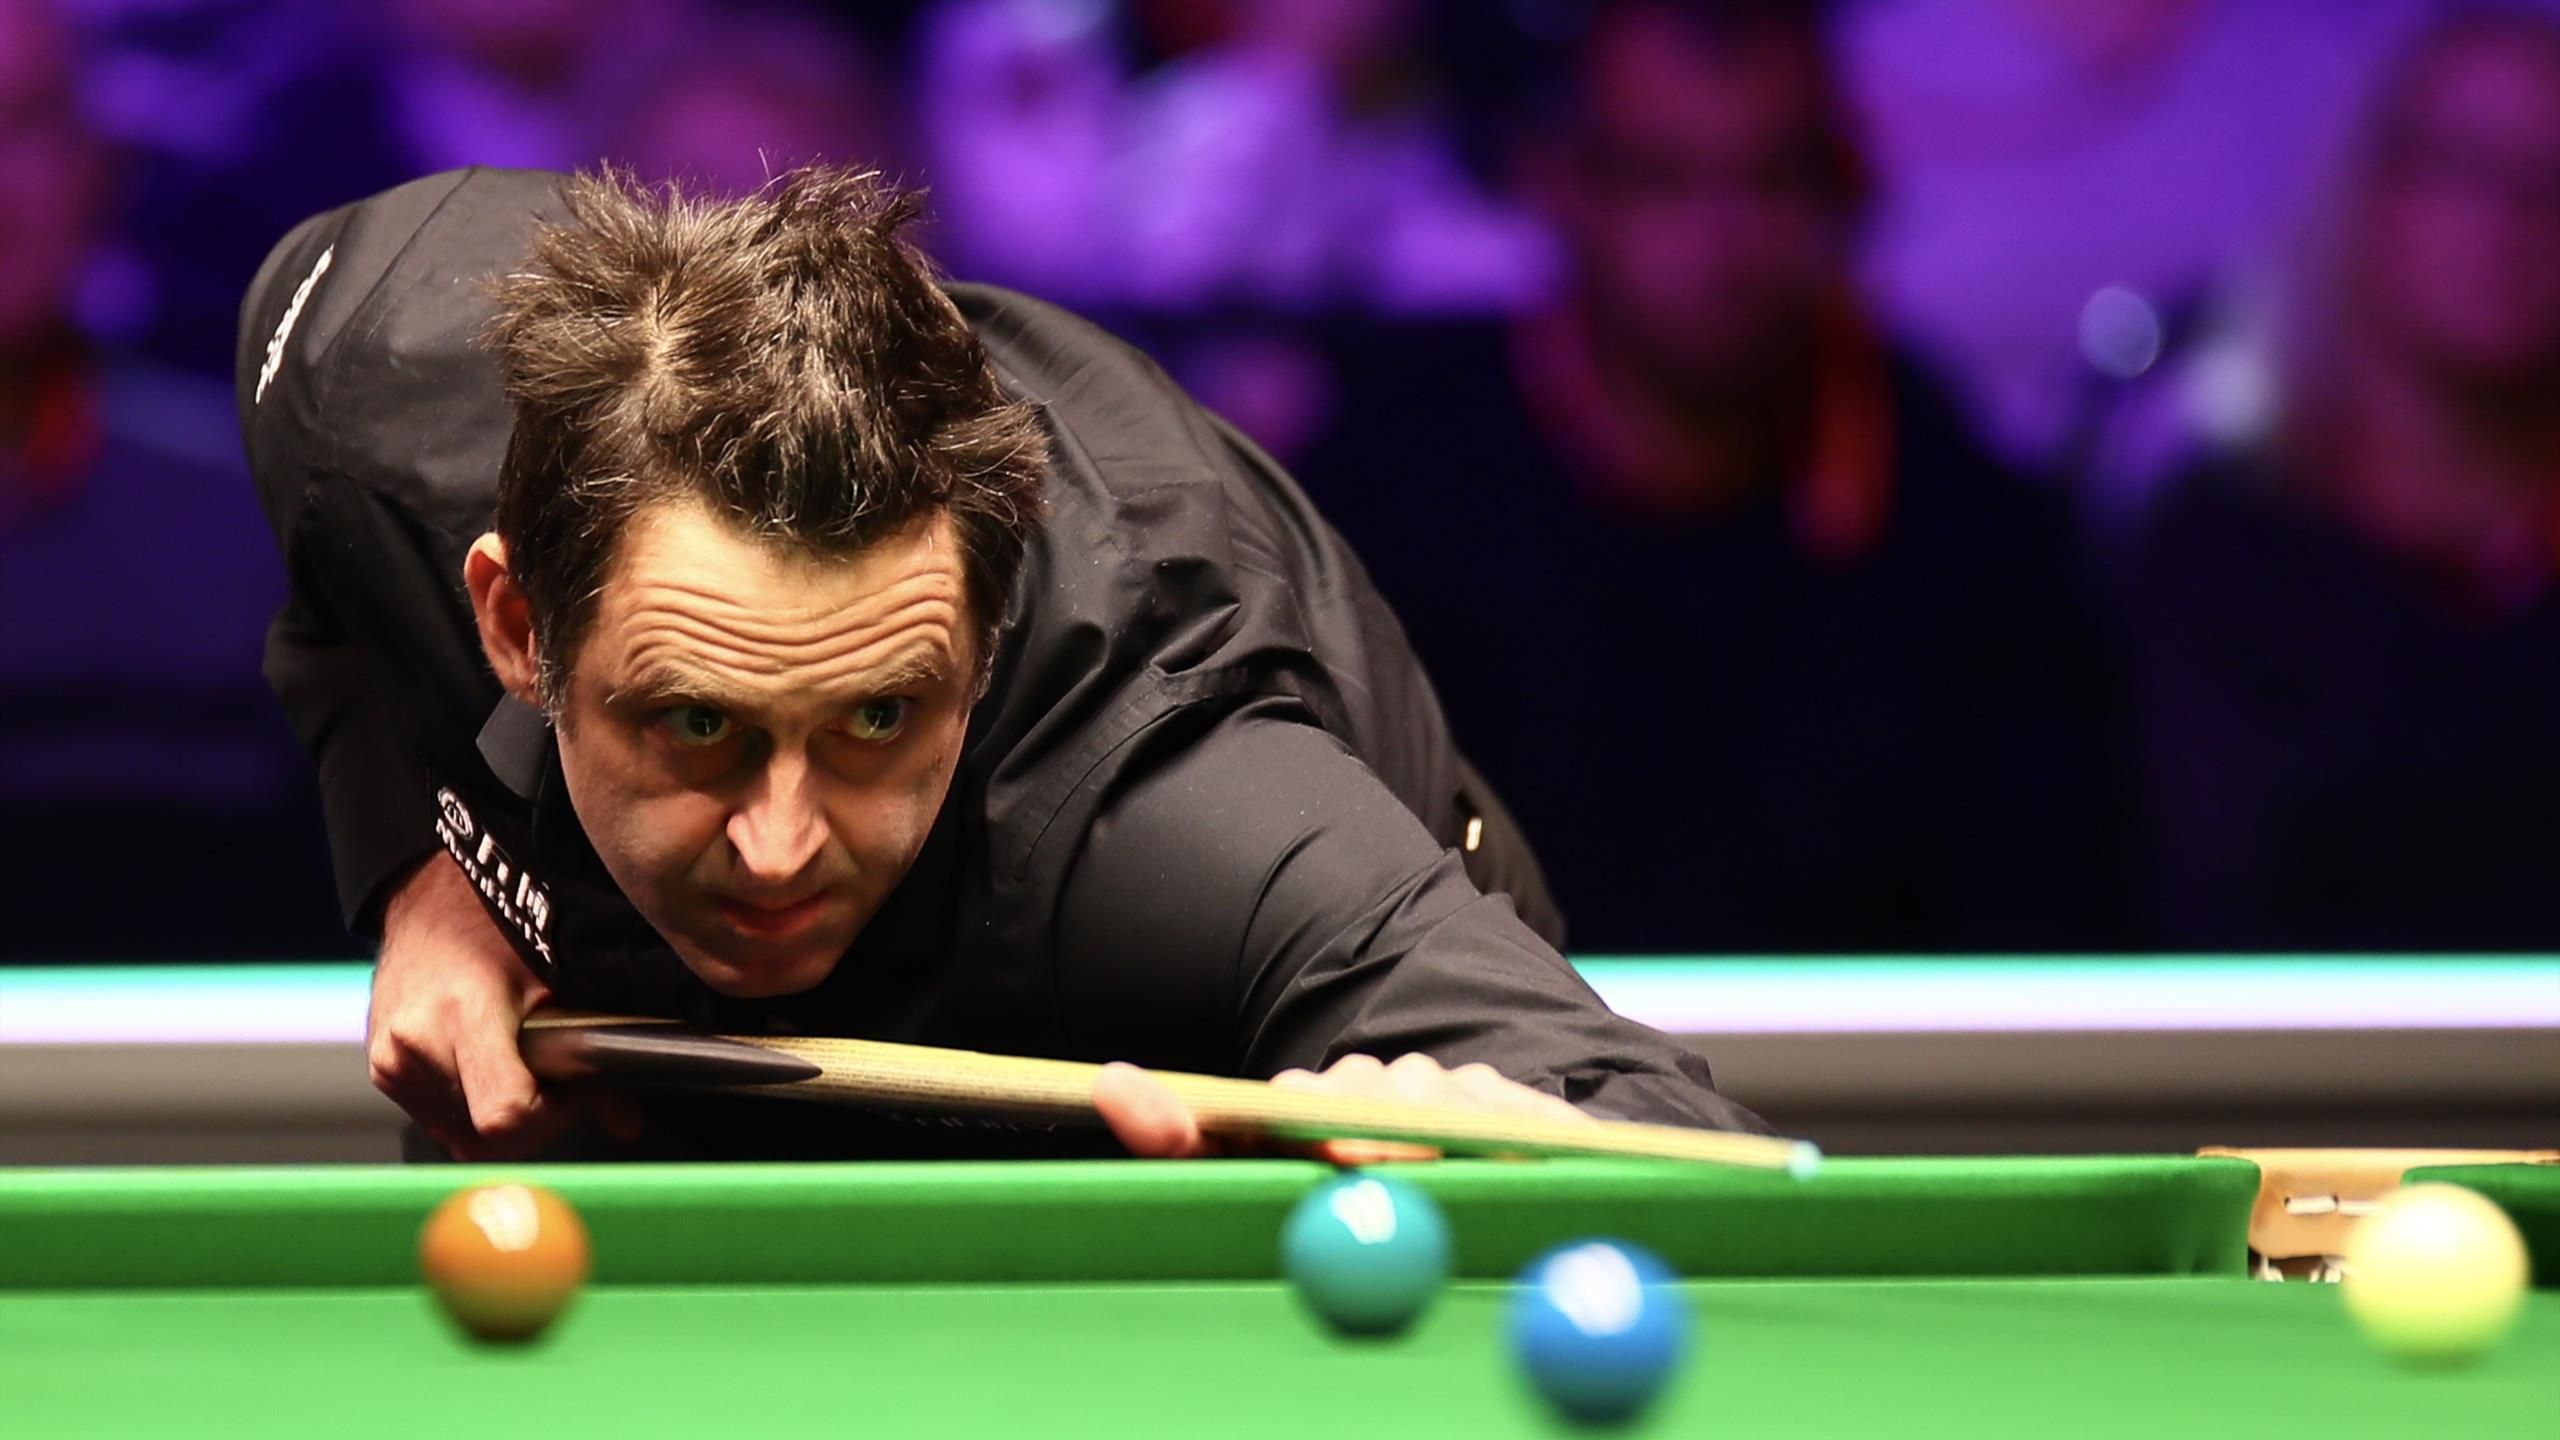 Ronnie O'Sullivan beats Mark Selby to reach final on night of drama and controversy